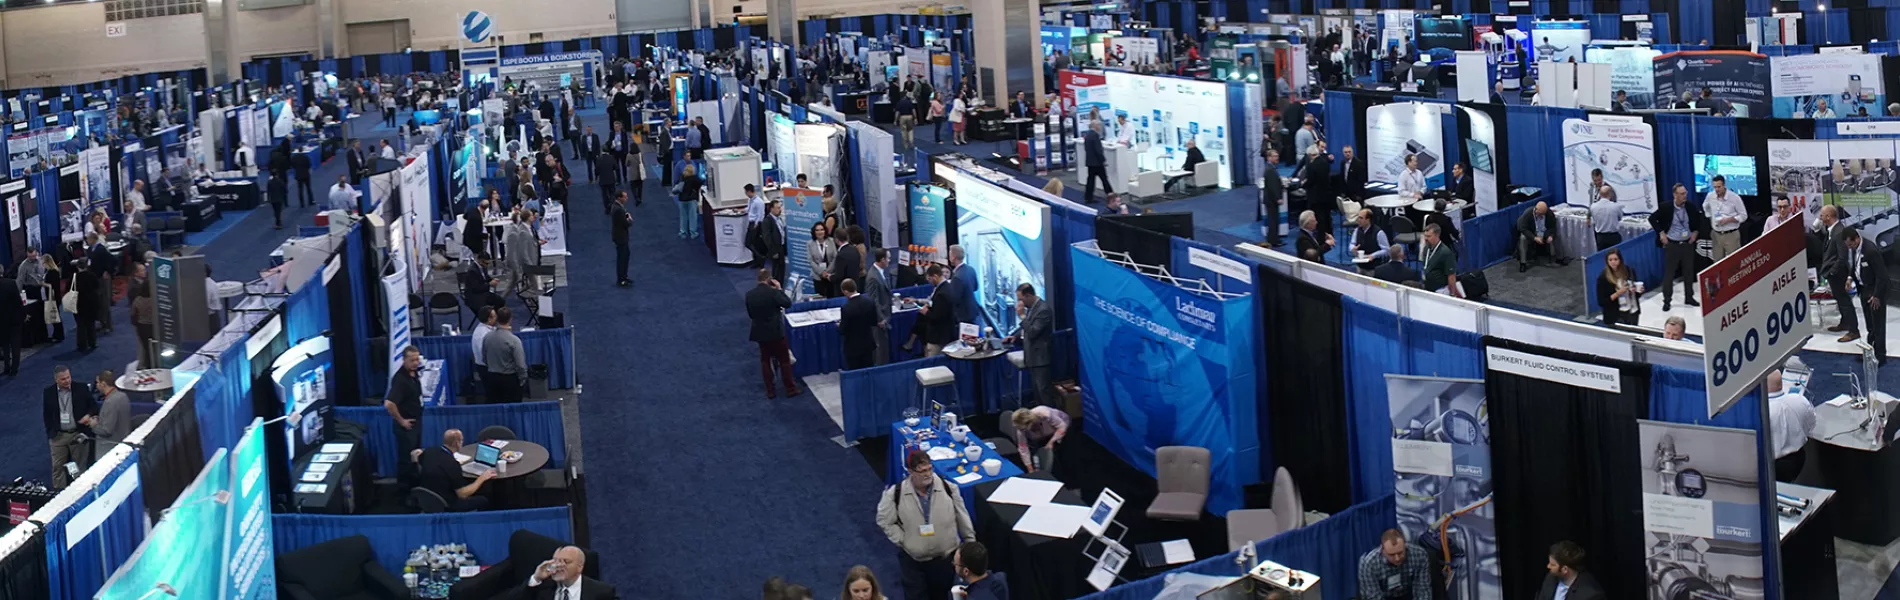 Know Before You Go: 2019 ISPE Annual Meeting and Expo